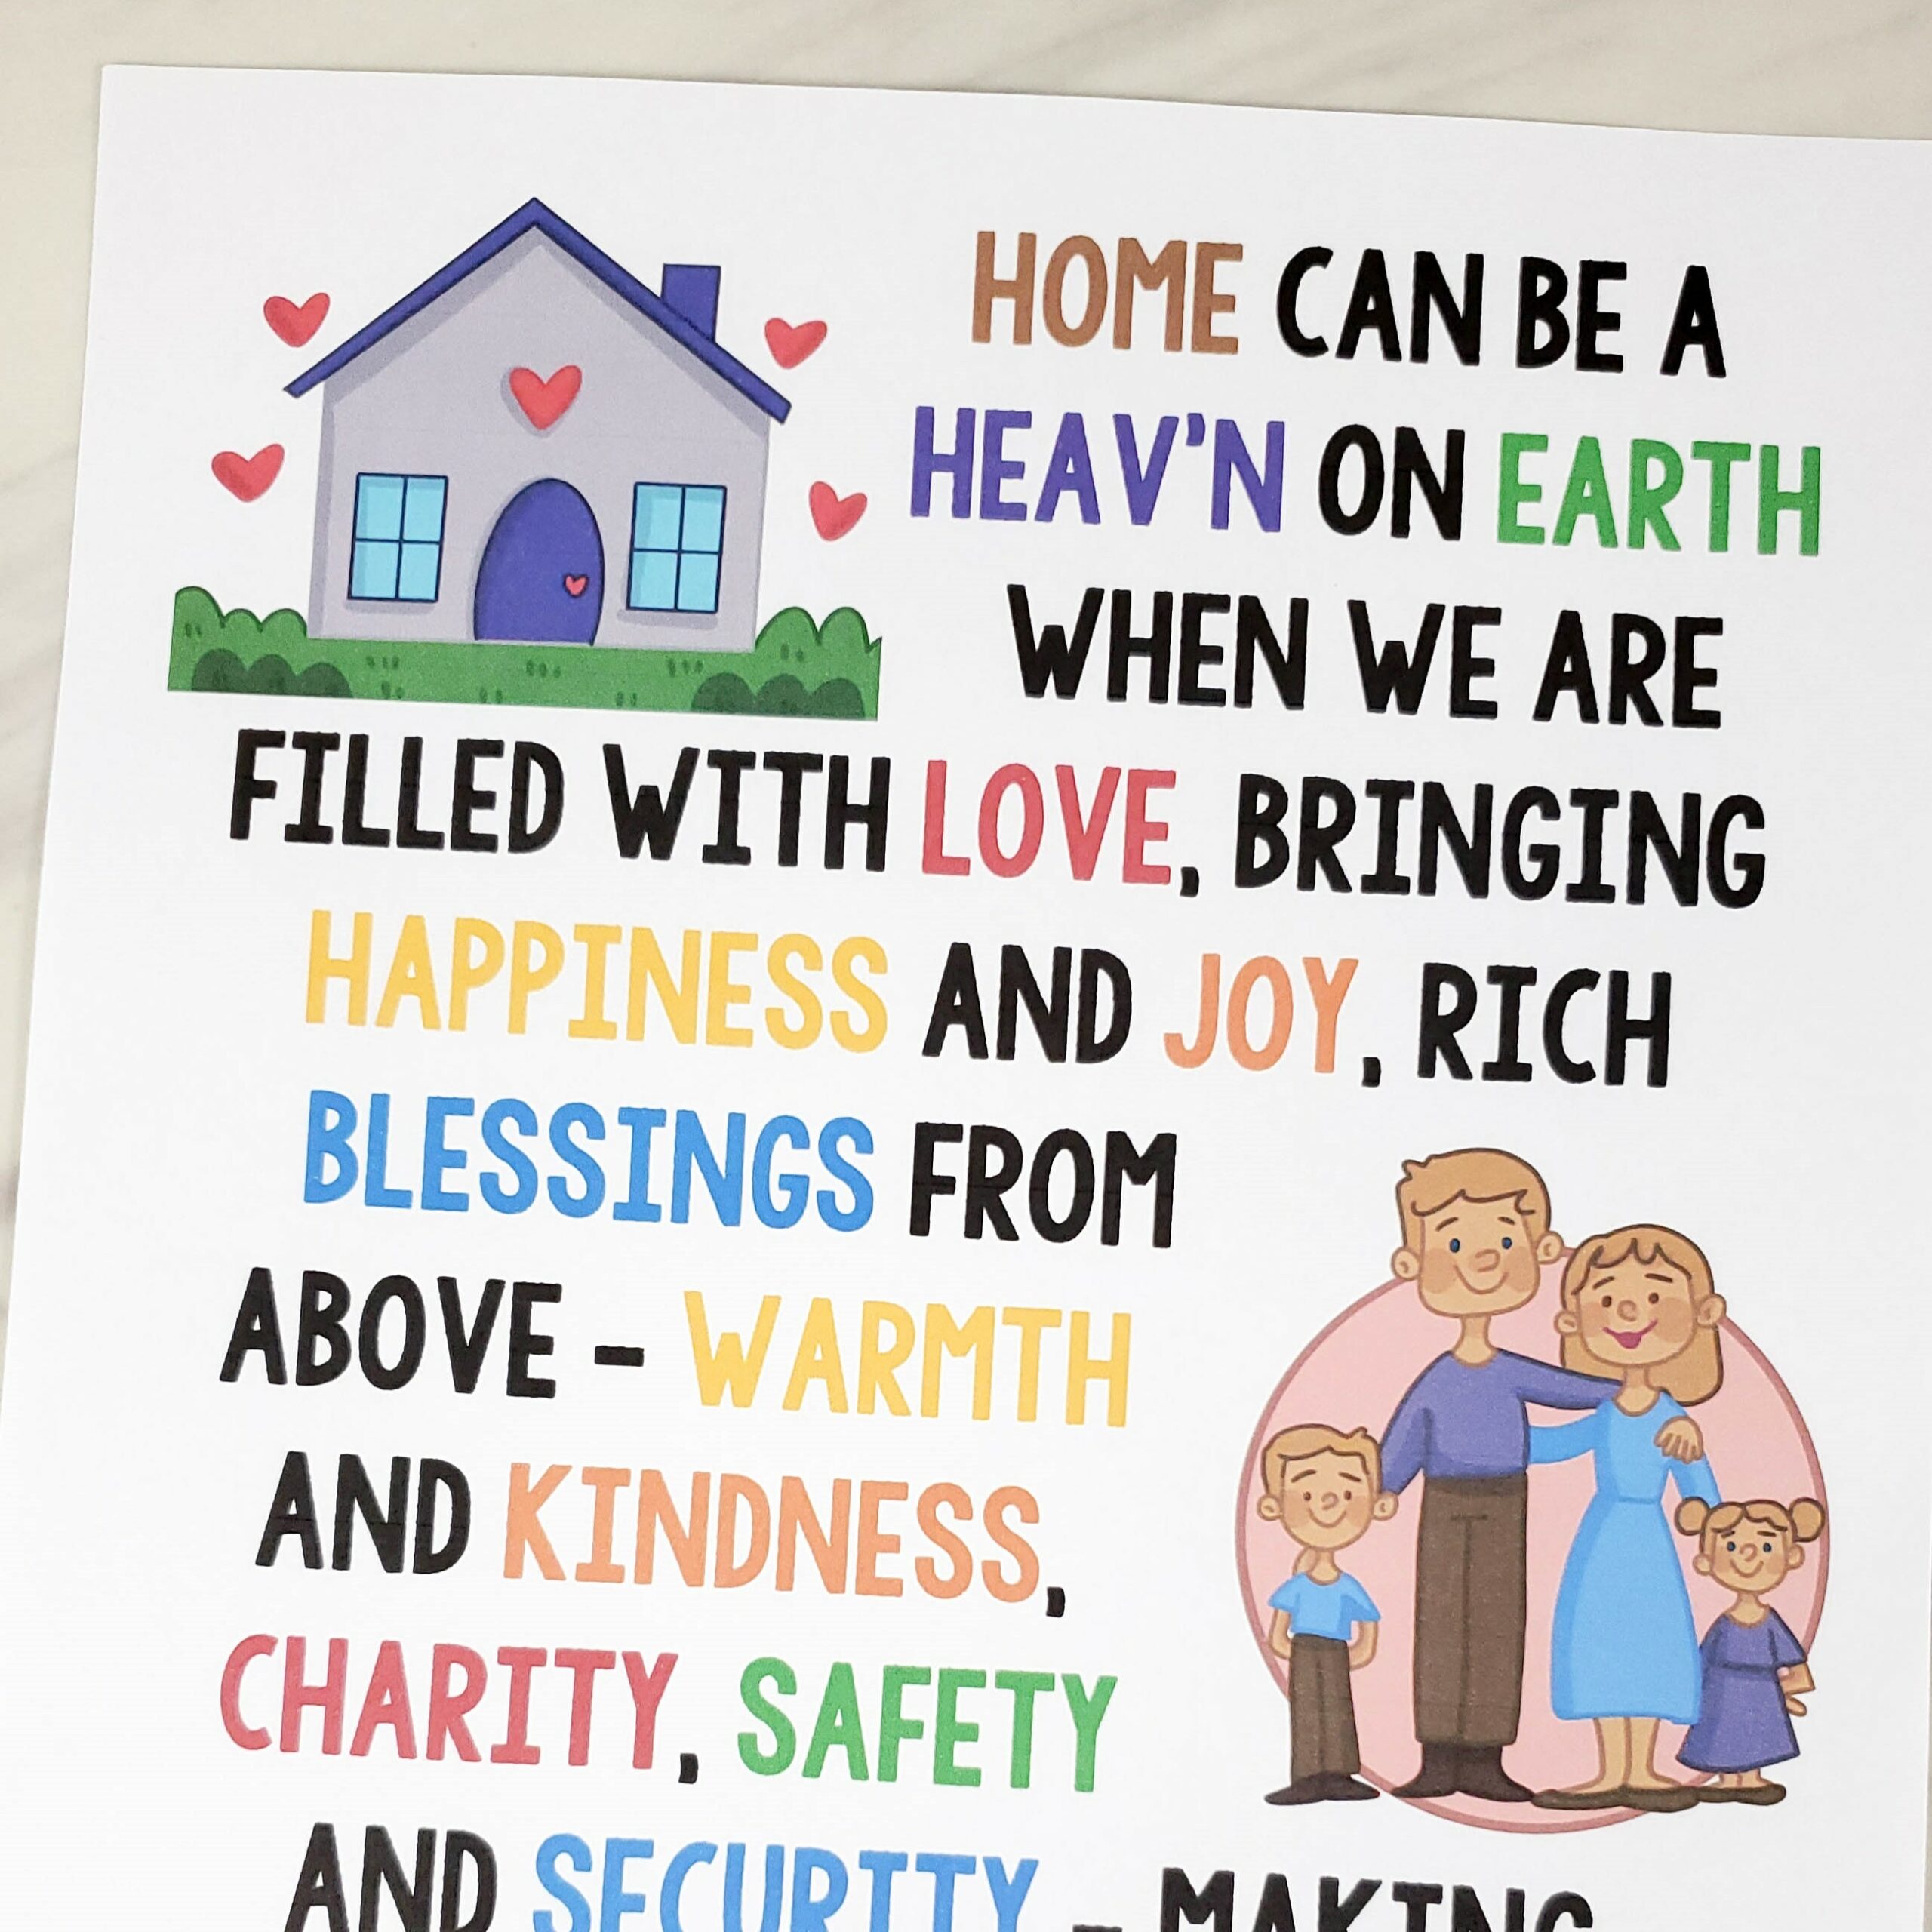 Home Can Be a Heaven on Earth Flip Chart for Primary Singing Time great visual aids to help teach this song for LDS Primary music leaders - illustration pictures and lyrics!